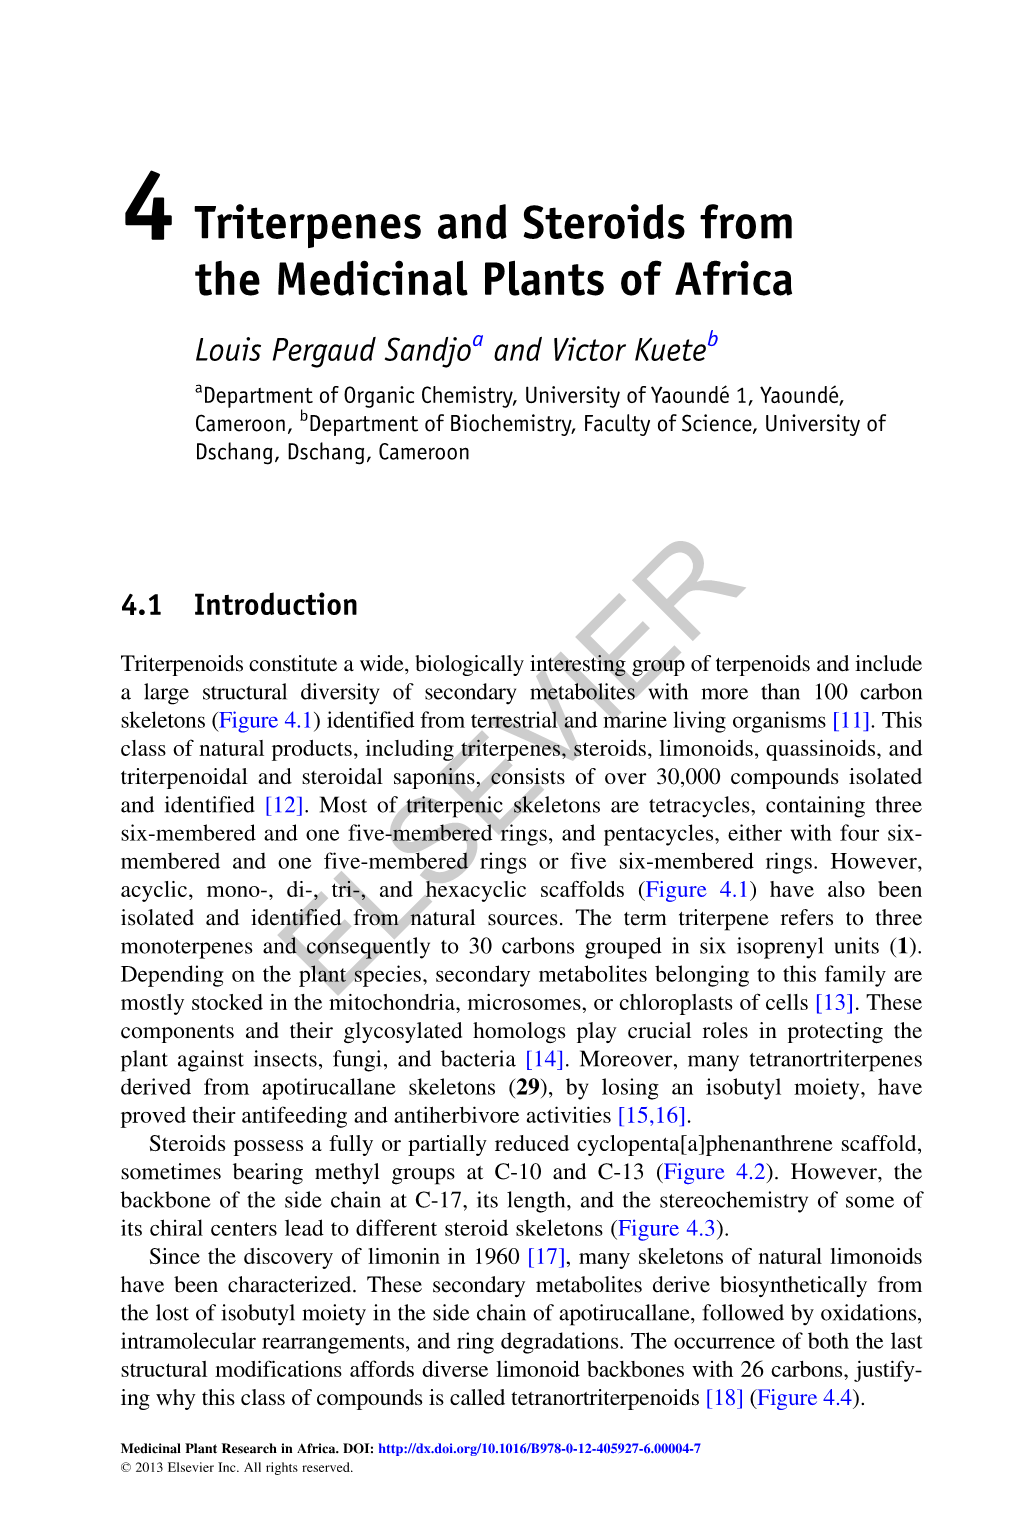 4. Triterpenes and Steroids from the Medicinal Plants of Africa